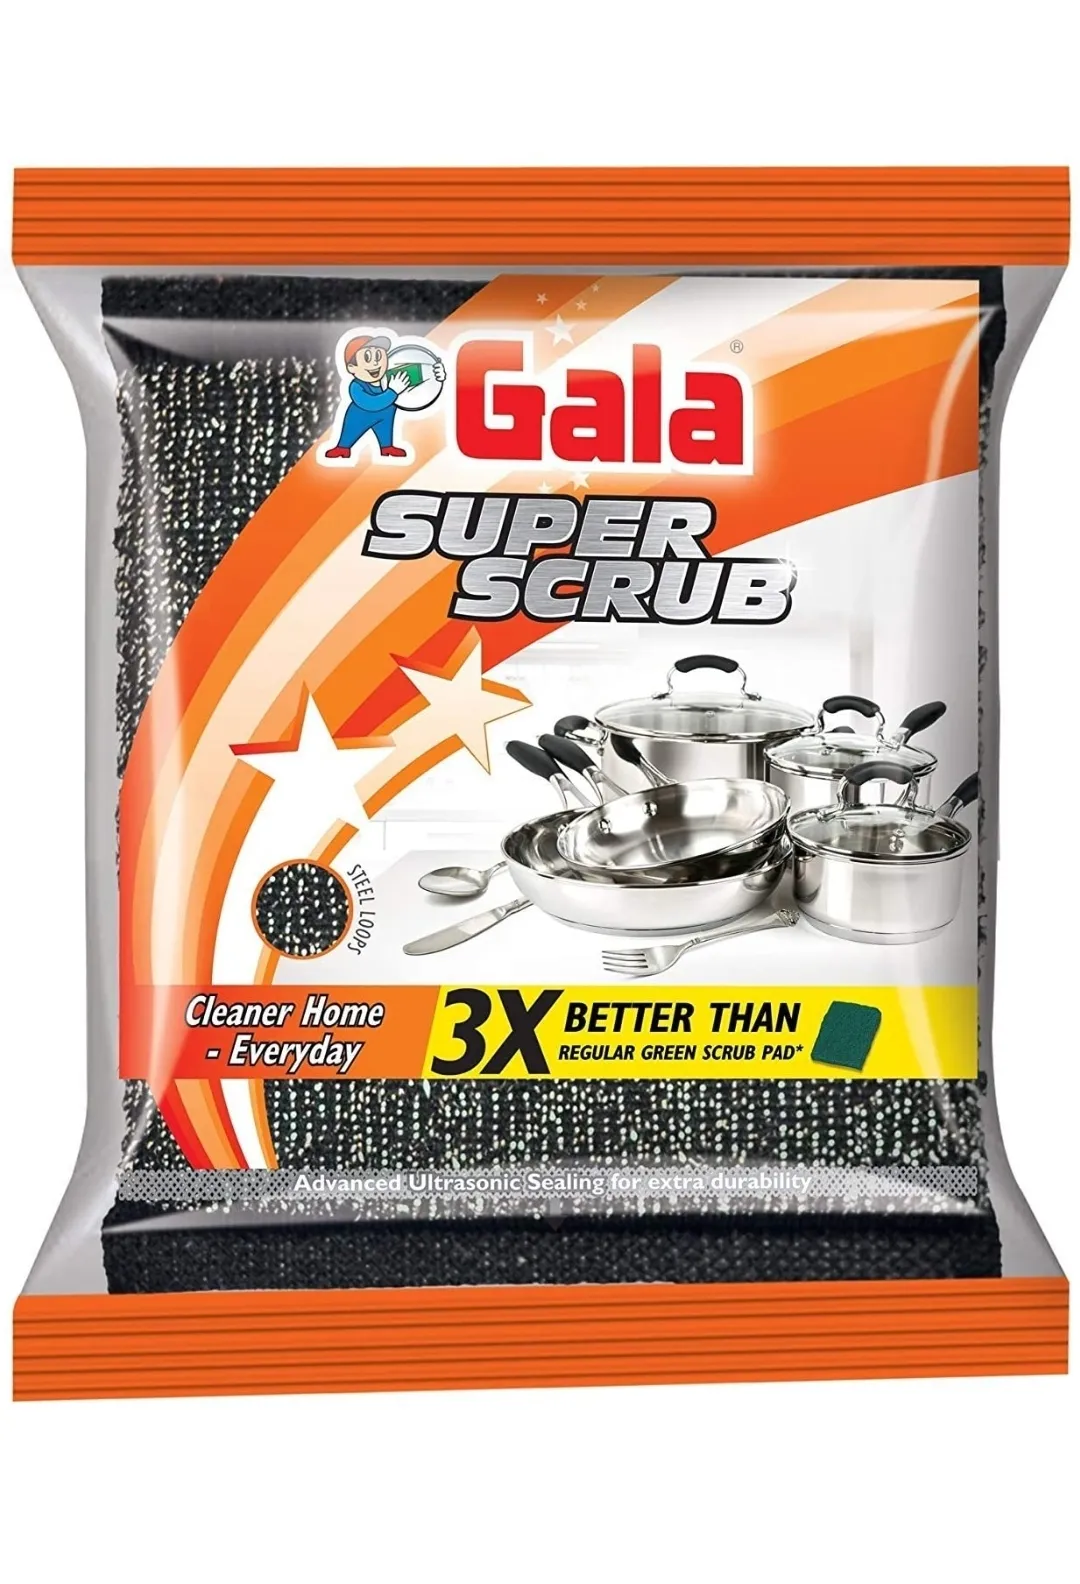 Gala Super Scrub, 3 Time Better Than Regular, Cleaner Home, Pack of 1